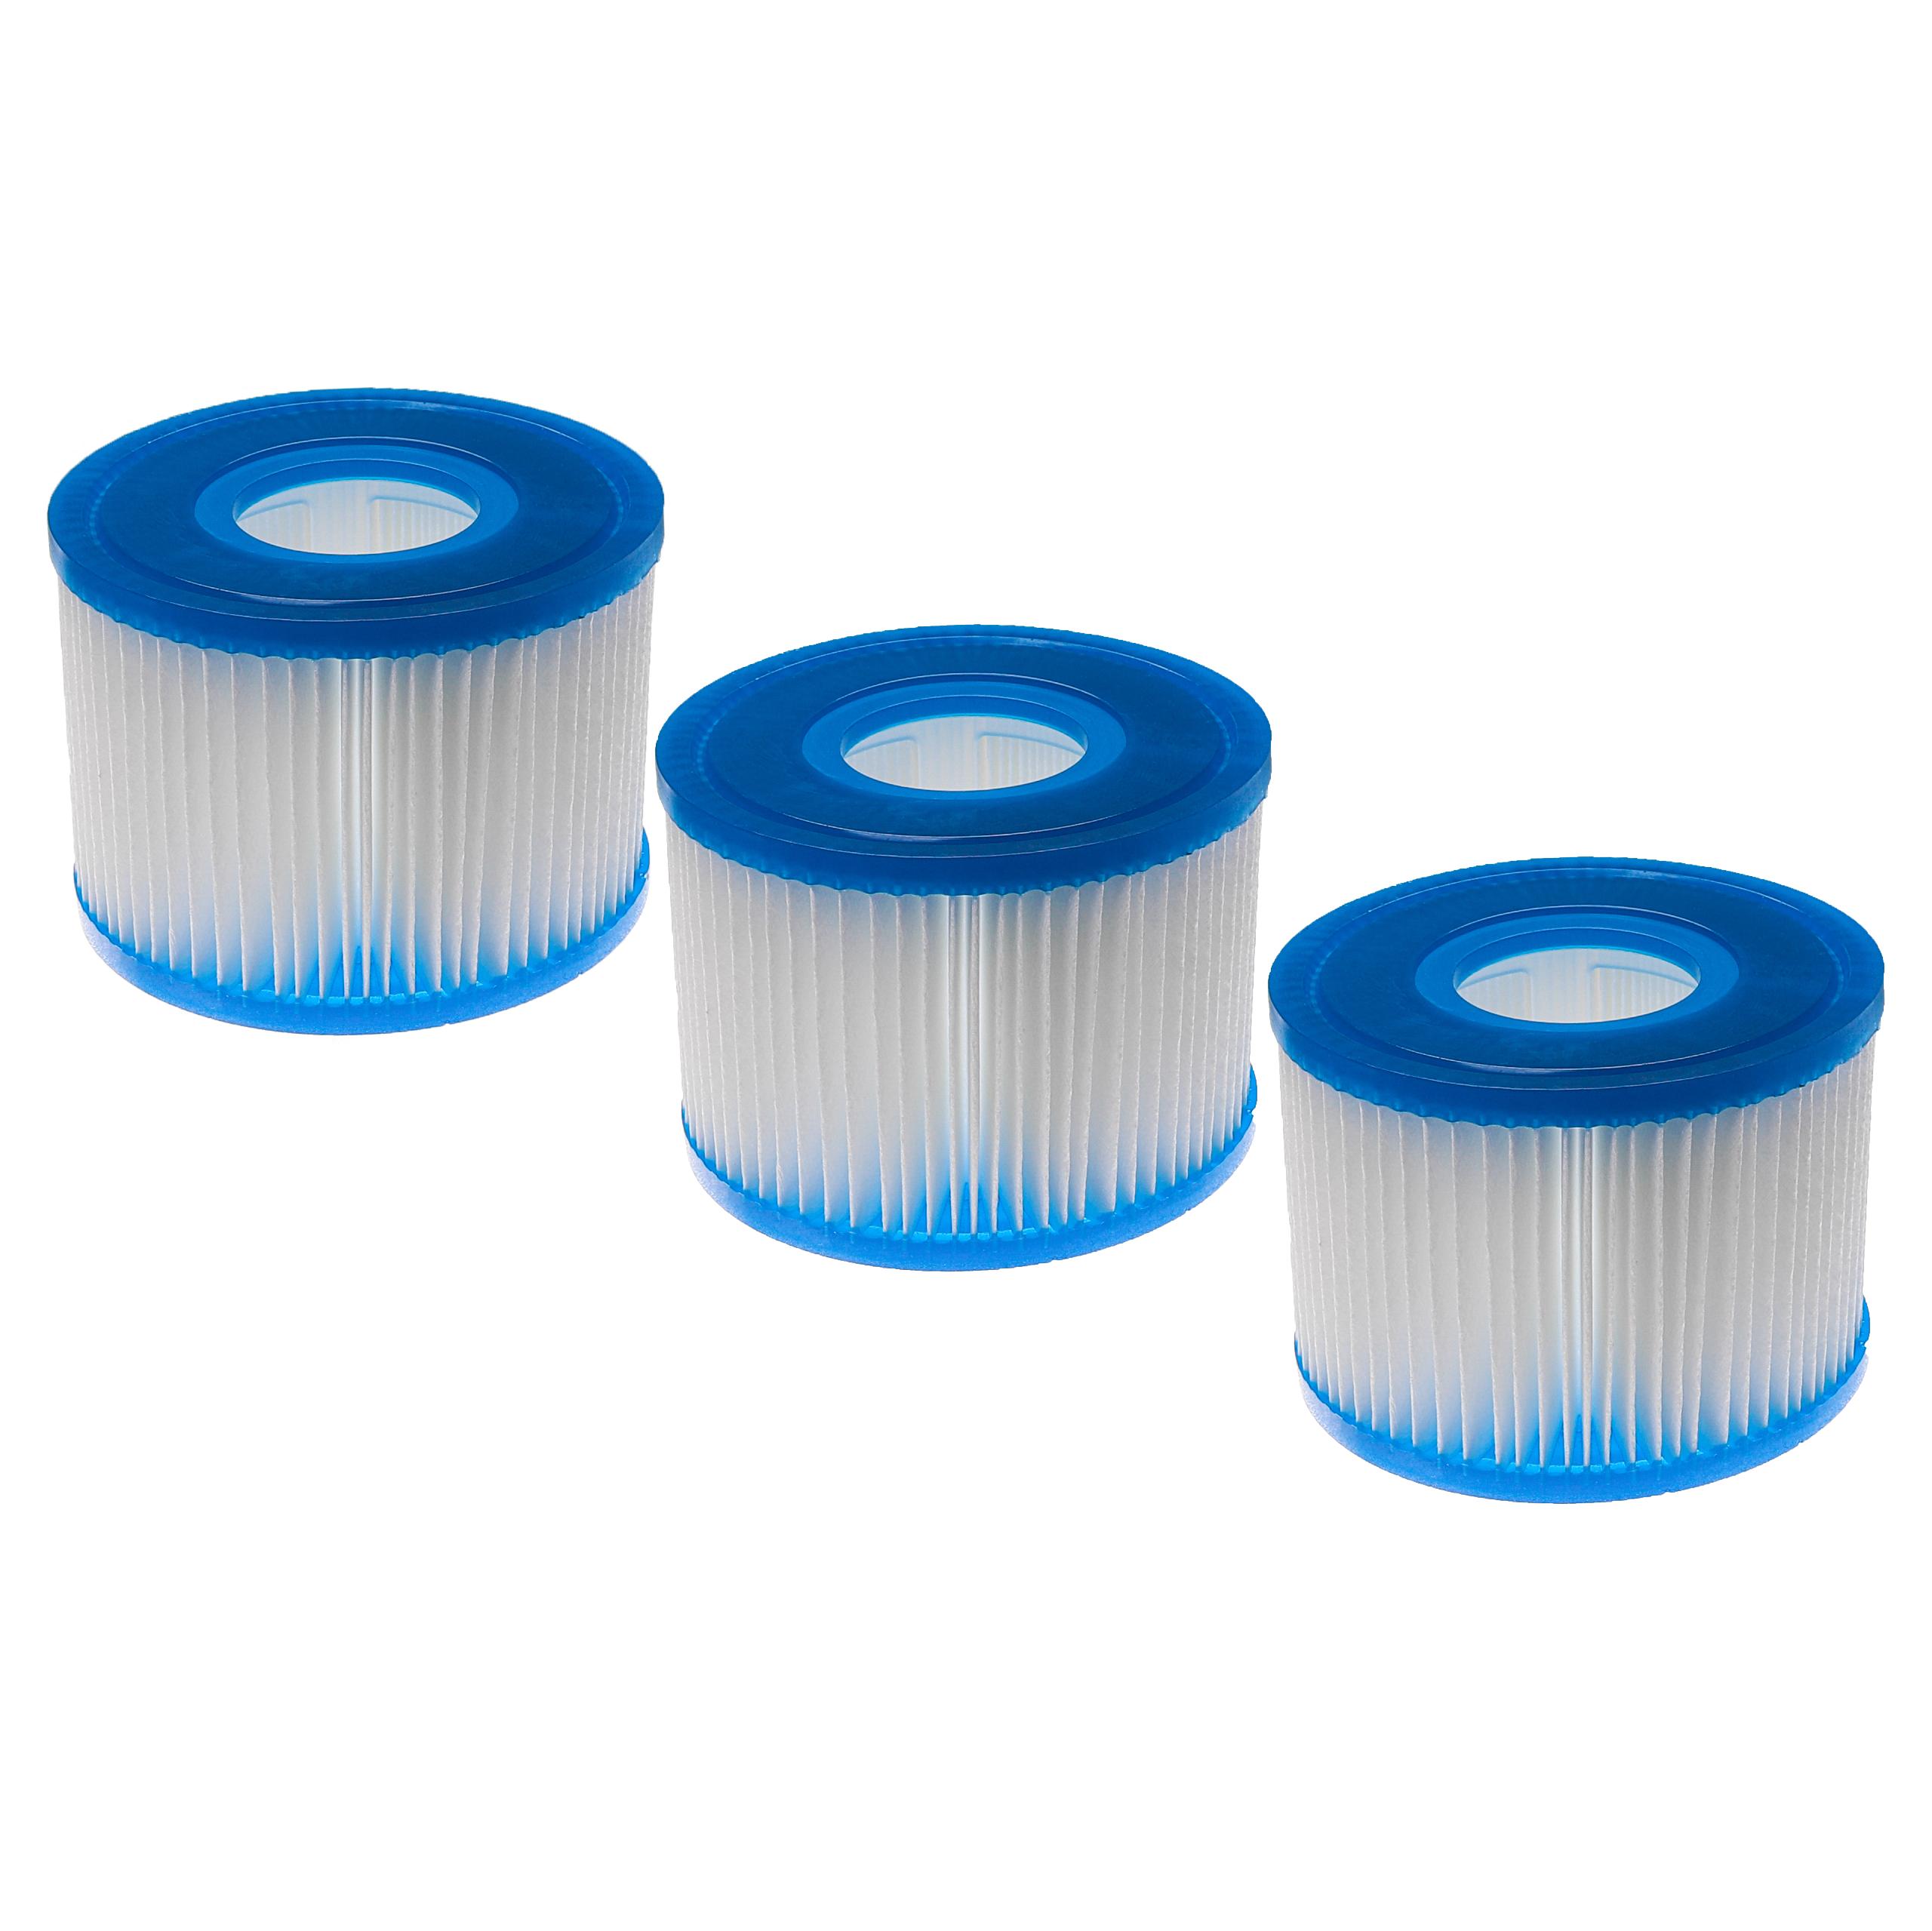 3x Pool Filter Type S1 as Replacement for Bestway FD2135 - Filter Cartridge